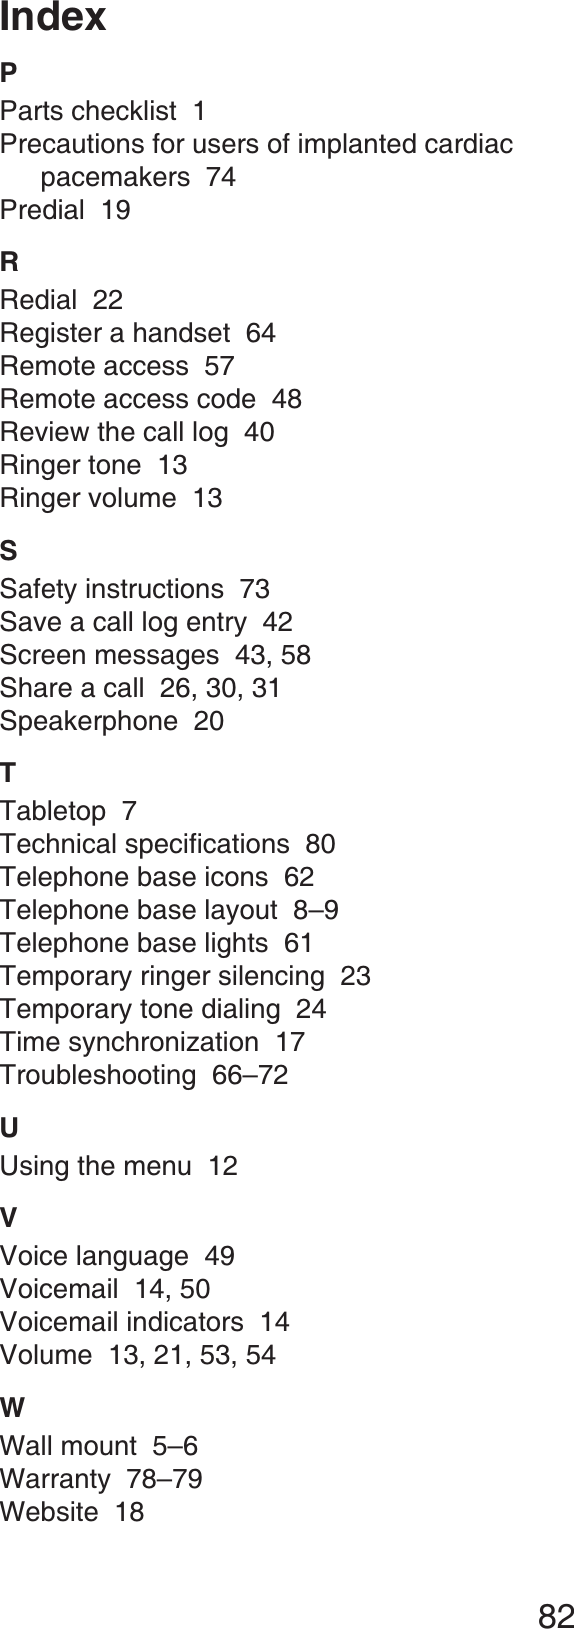 82IndexPParts checklist 1Precautions for users of implanted cardiac pacemakers 74Predial 19RRedial 22Register a handset 64Remote access 57Remote access code 48Review the call log 40Ringer tone 13Ringer volume 13SSafety instructions 73Save a call log entry 42Screen messages  43, 58Share a call  26, 30, 31Speakerphone 20TTabletop 76GEJPKECNURGEKſECVKQPU80Telephone base icons  62Telephone base layout 8–9Telephone base lights 61Temporary ringer silencing 23Temporary tone dialing 24Time synchronization 17Troubleshooting 66–72UUsing the menu 12VVoice language 49Voicemail 14, 50Voicemail indicators 14Volume 13, 21, 53, 54WWall mount 5–6Warranty  78–79Website 18